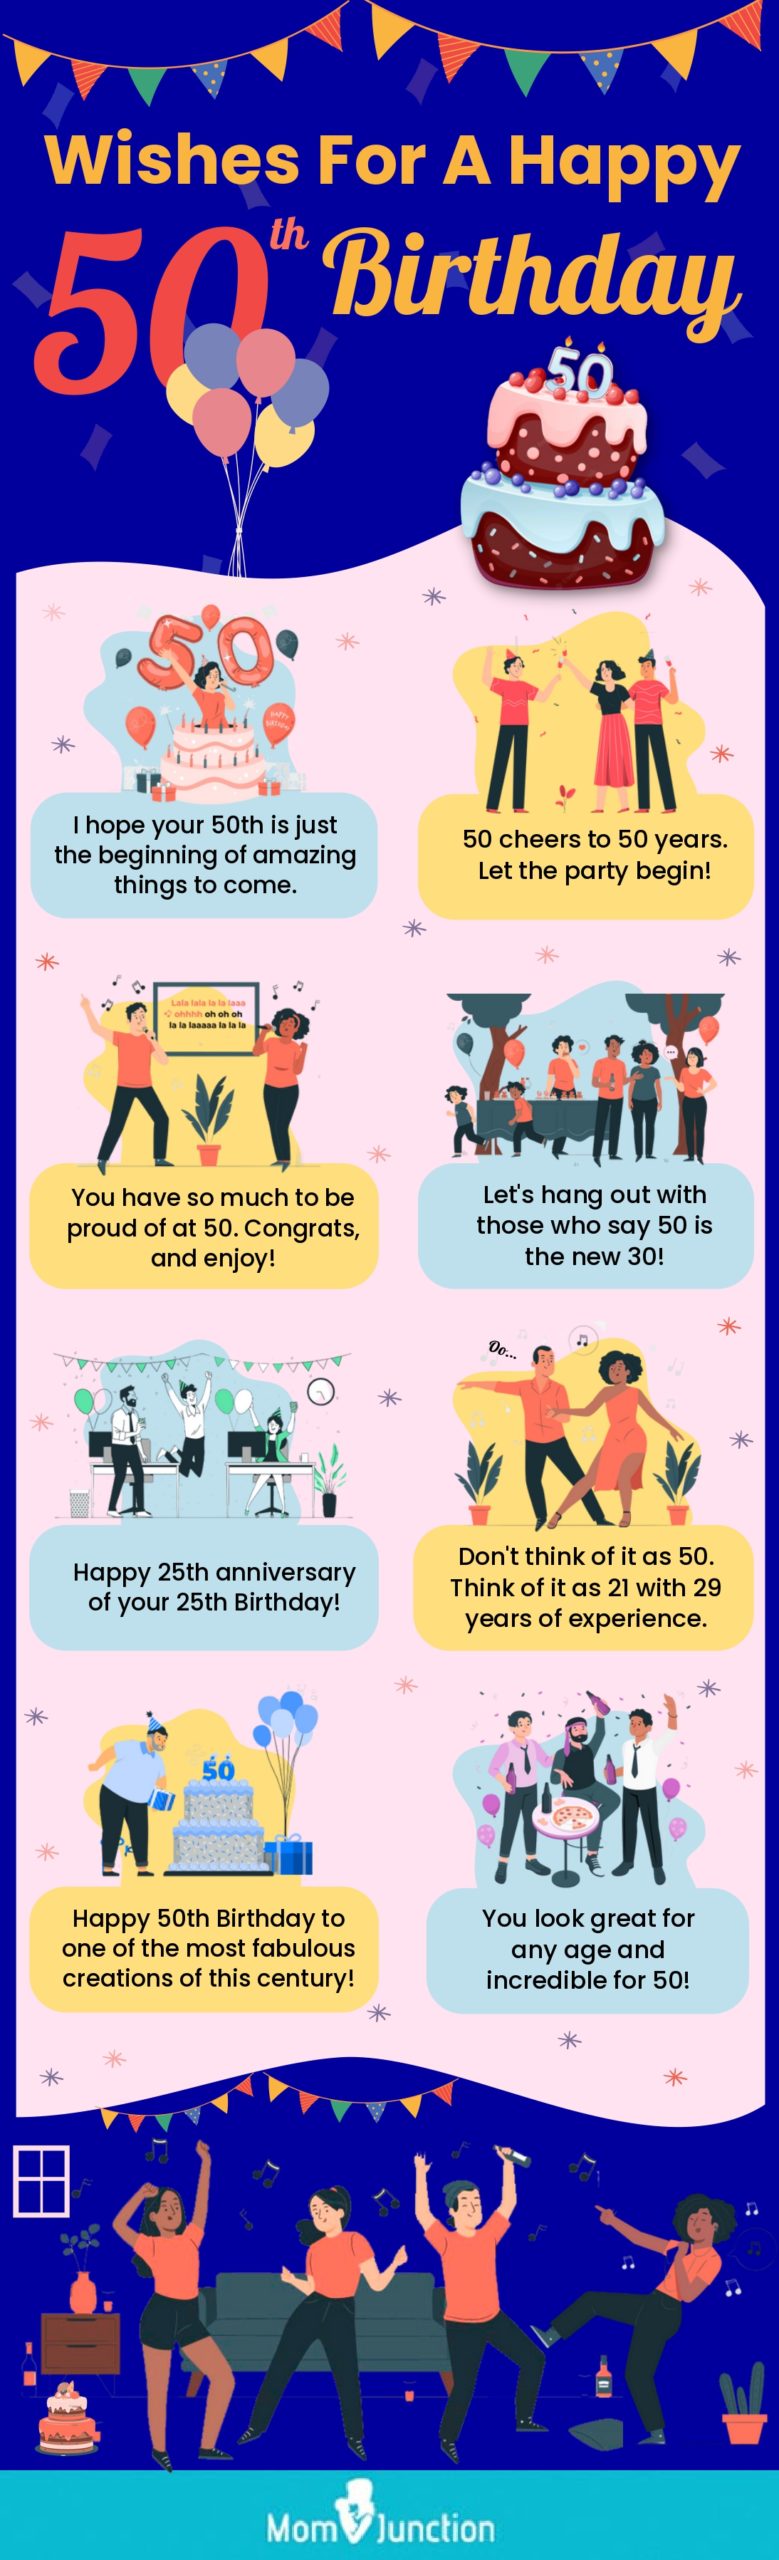 50th birthday wishes (infographic)